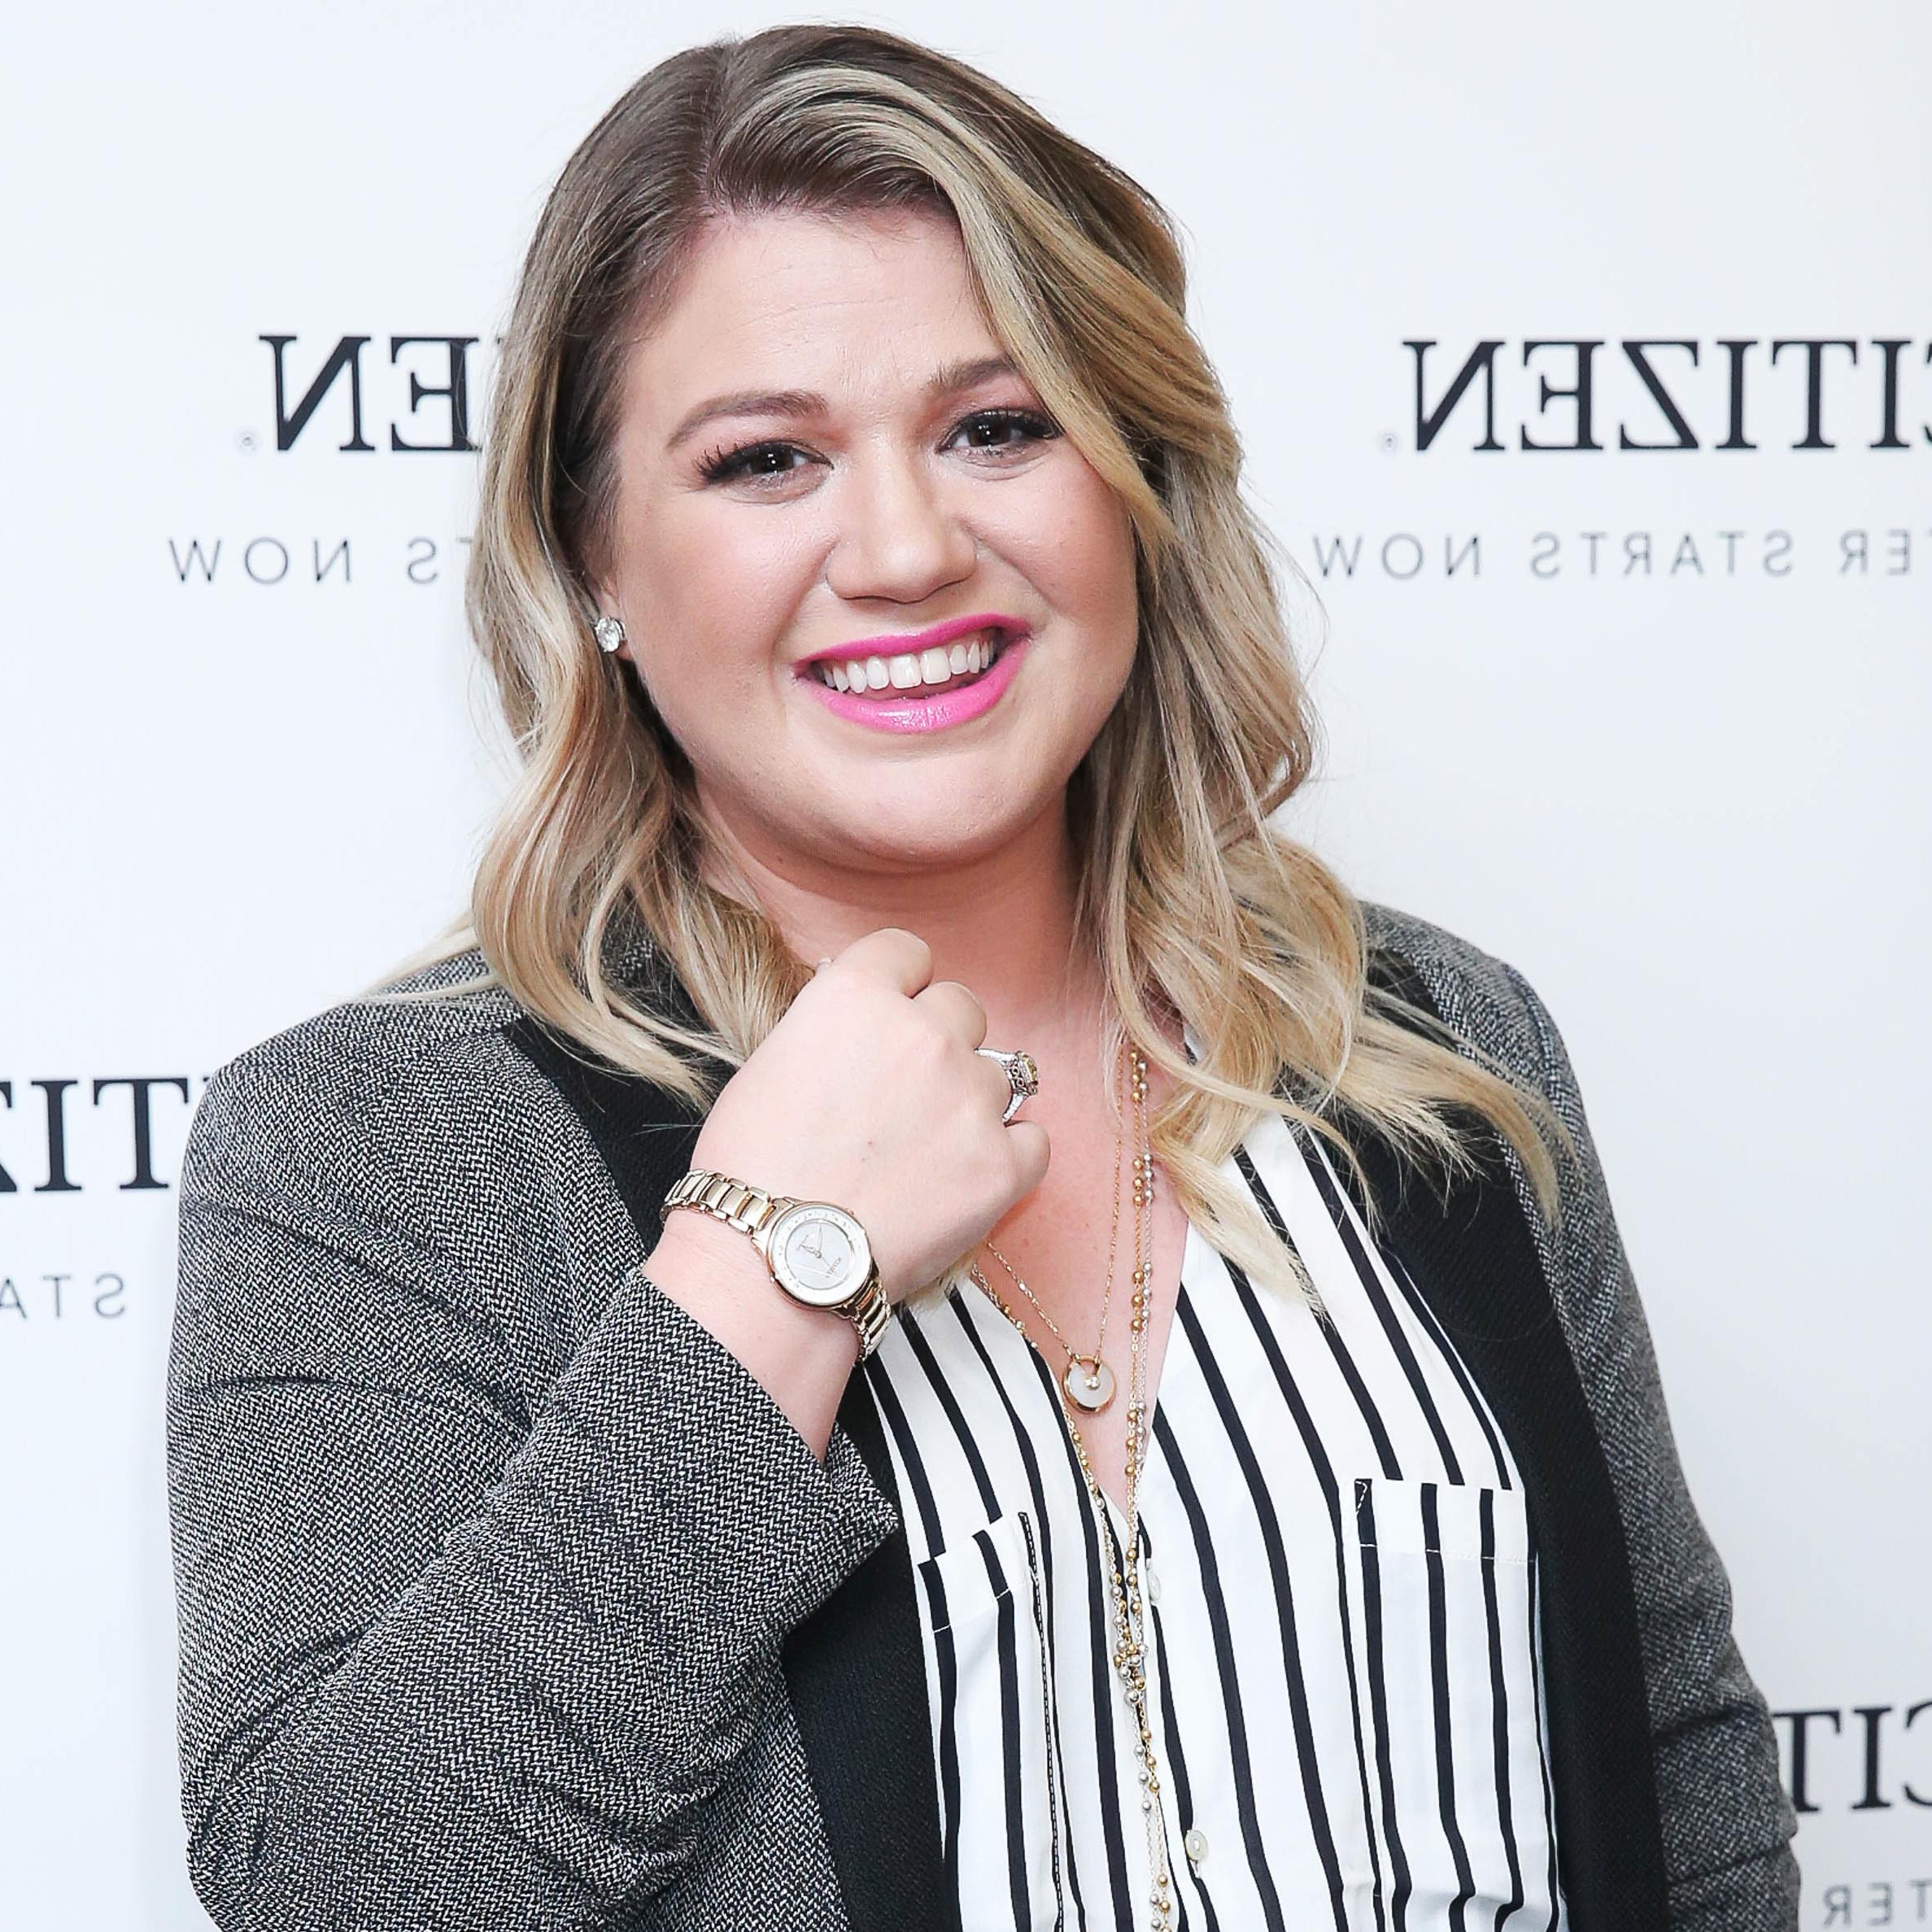 The latest photo of singer Kelly Clarkson